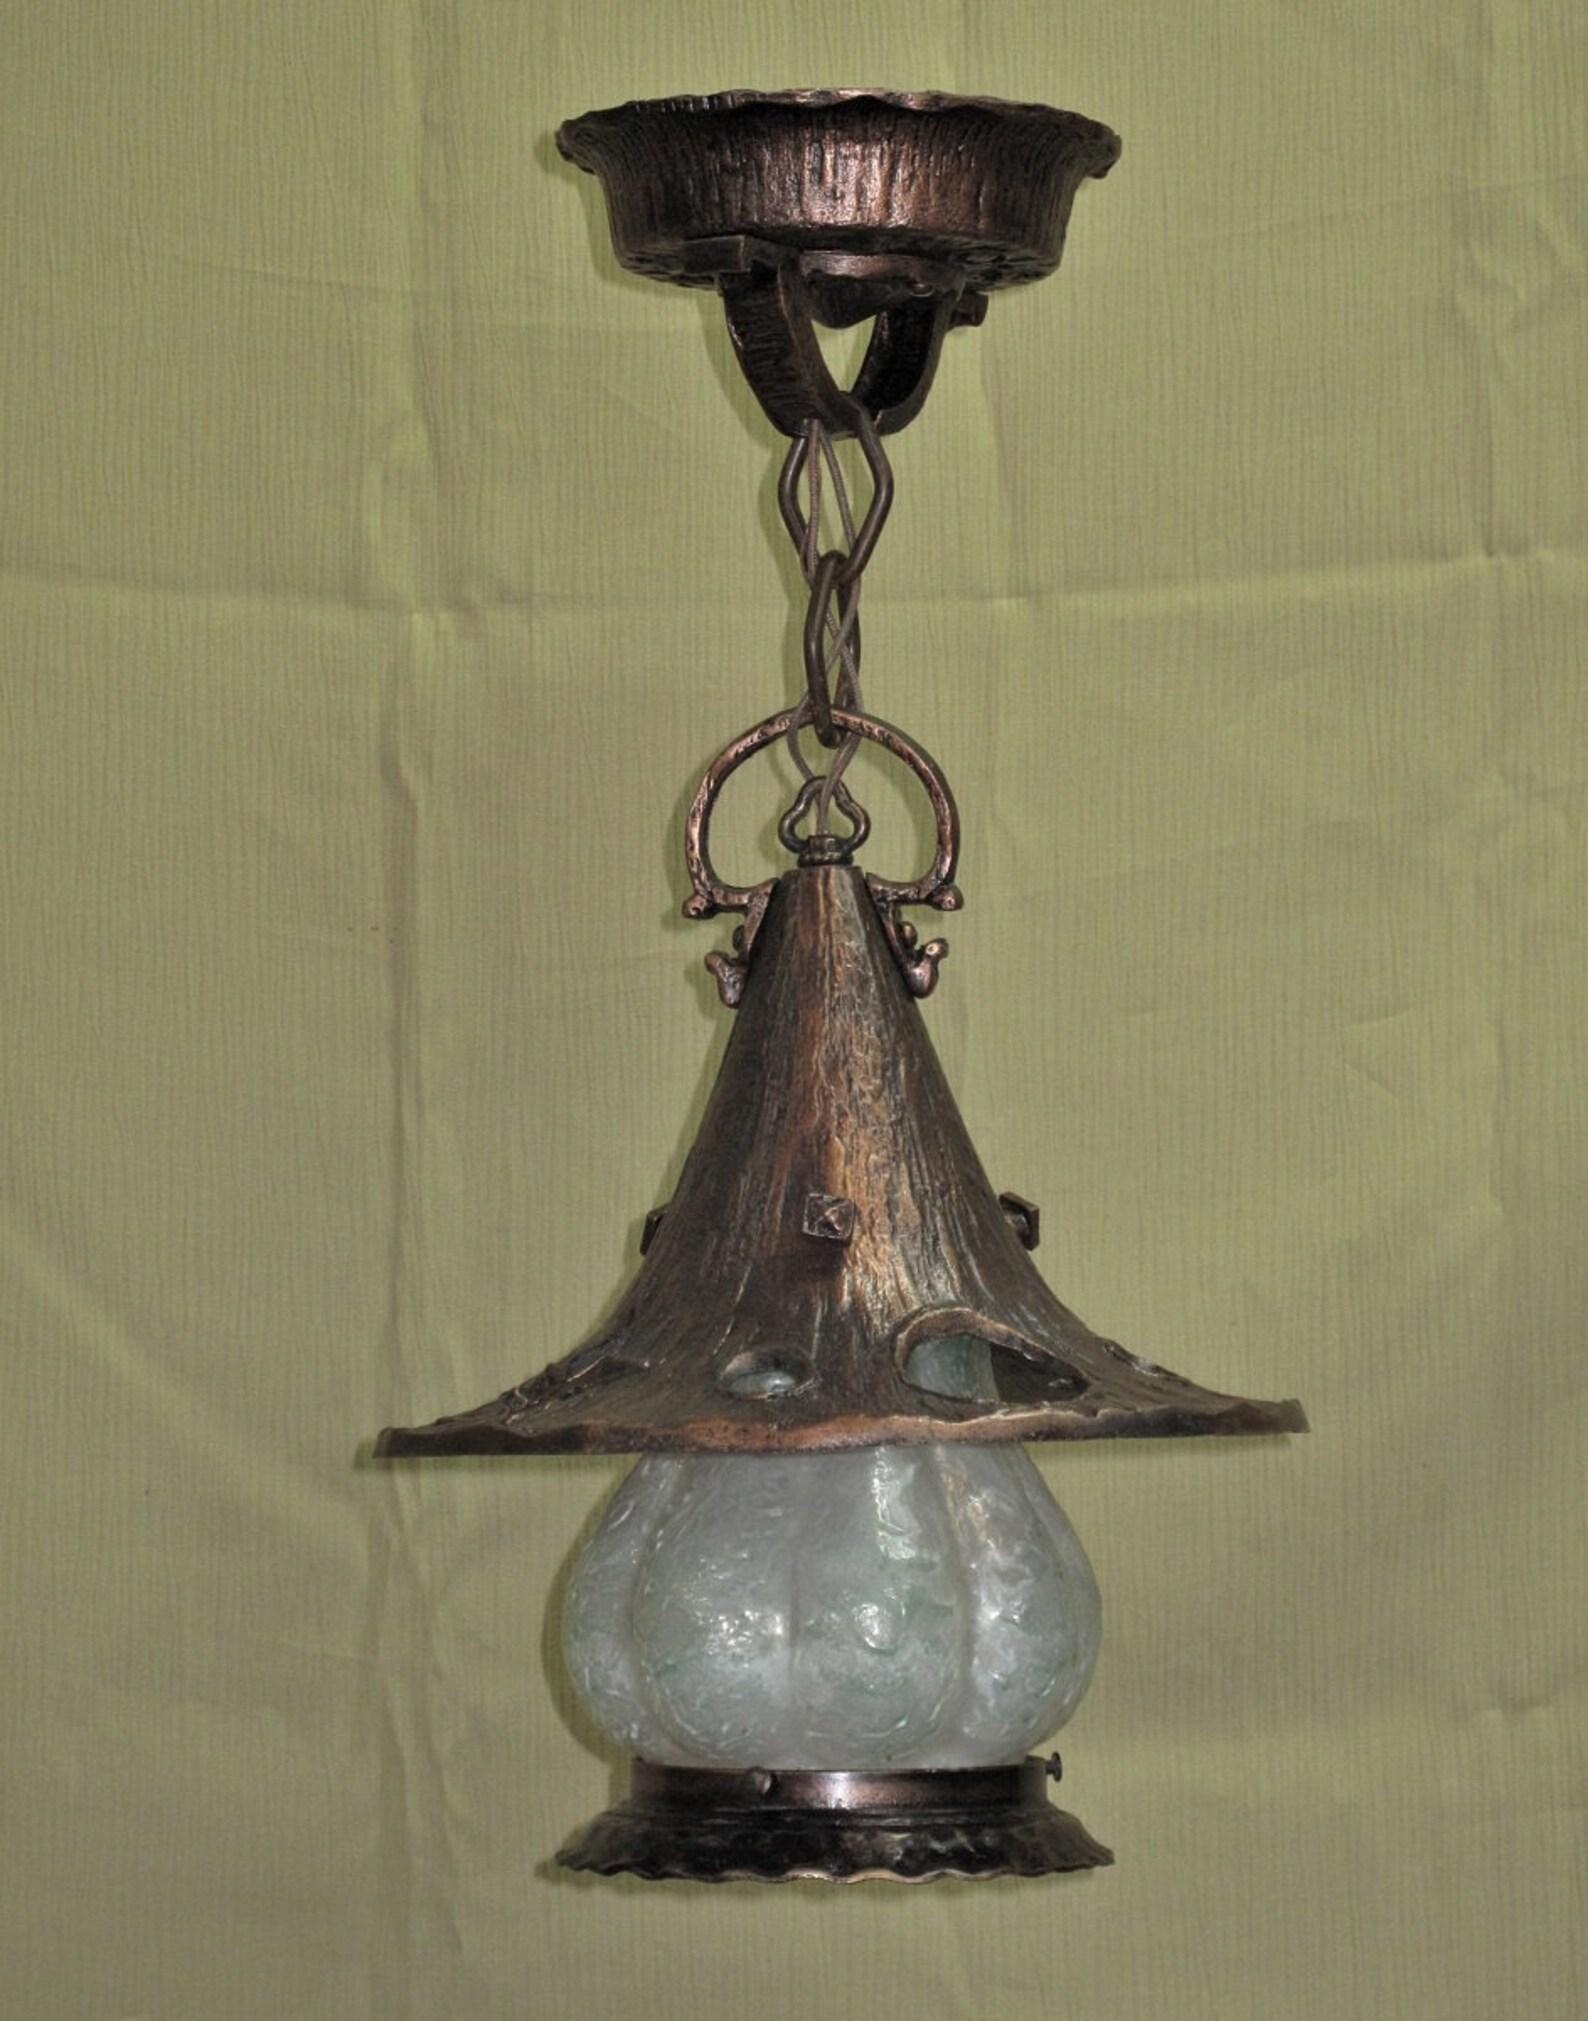 American Craftsman 1920s / 30s Storybook Style Witches Hat Porch Light with Moon Sun & Stars